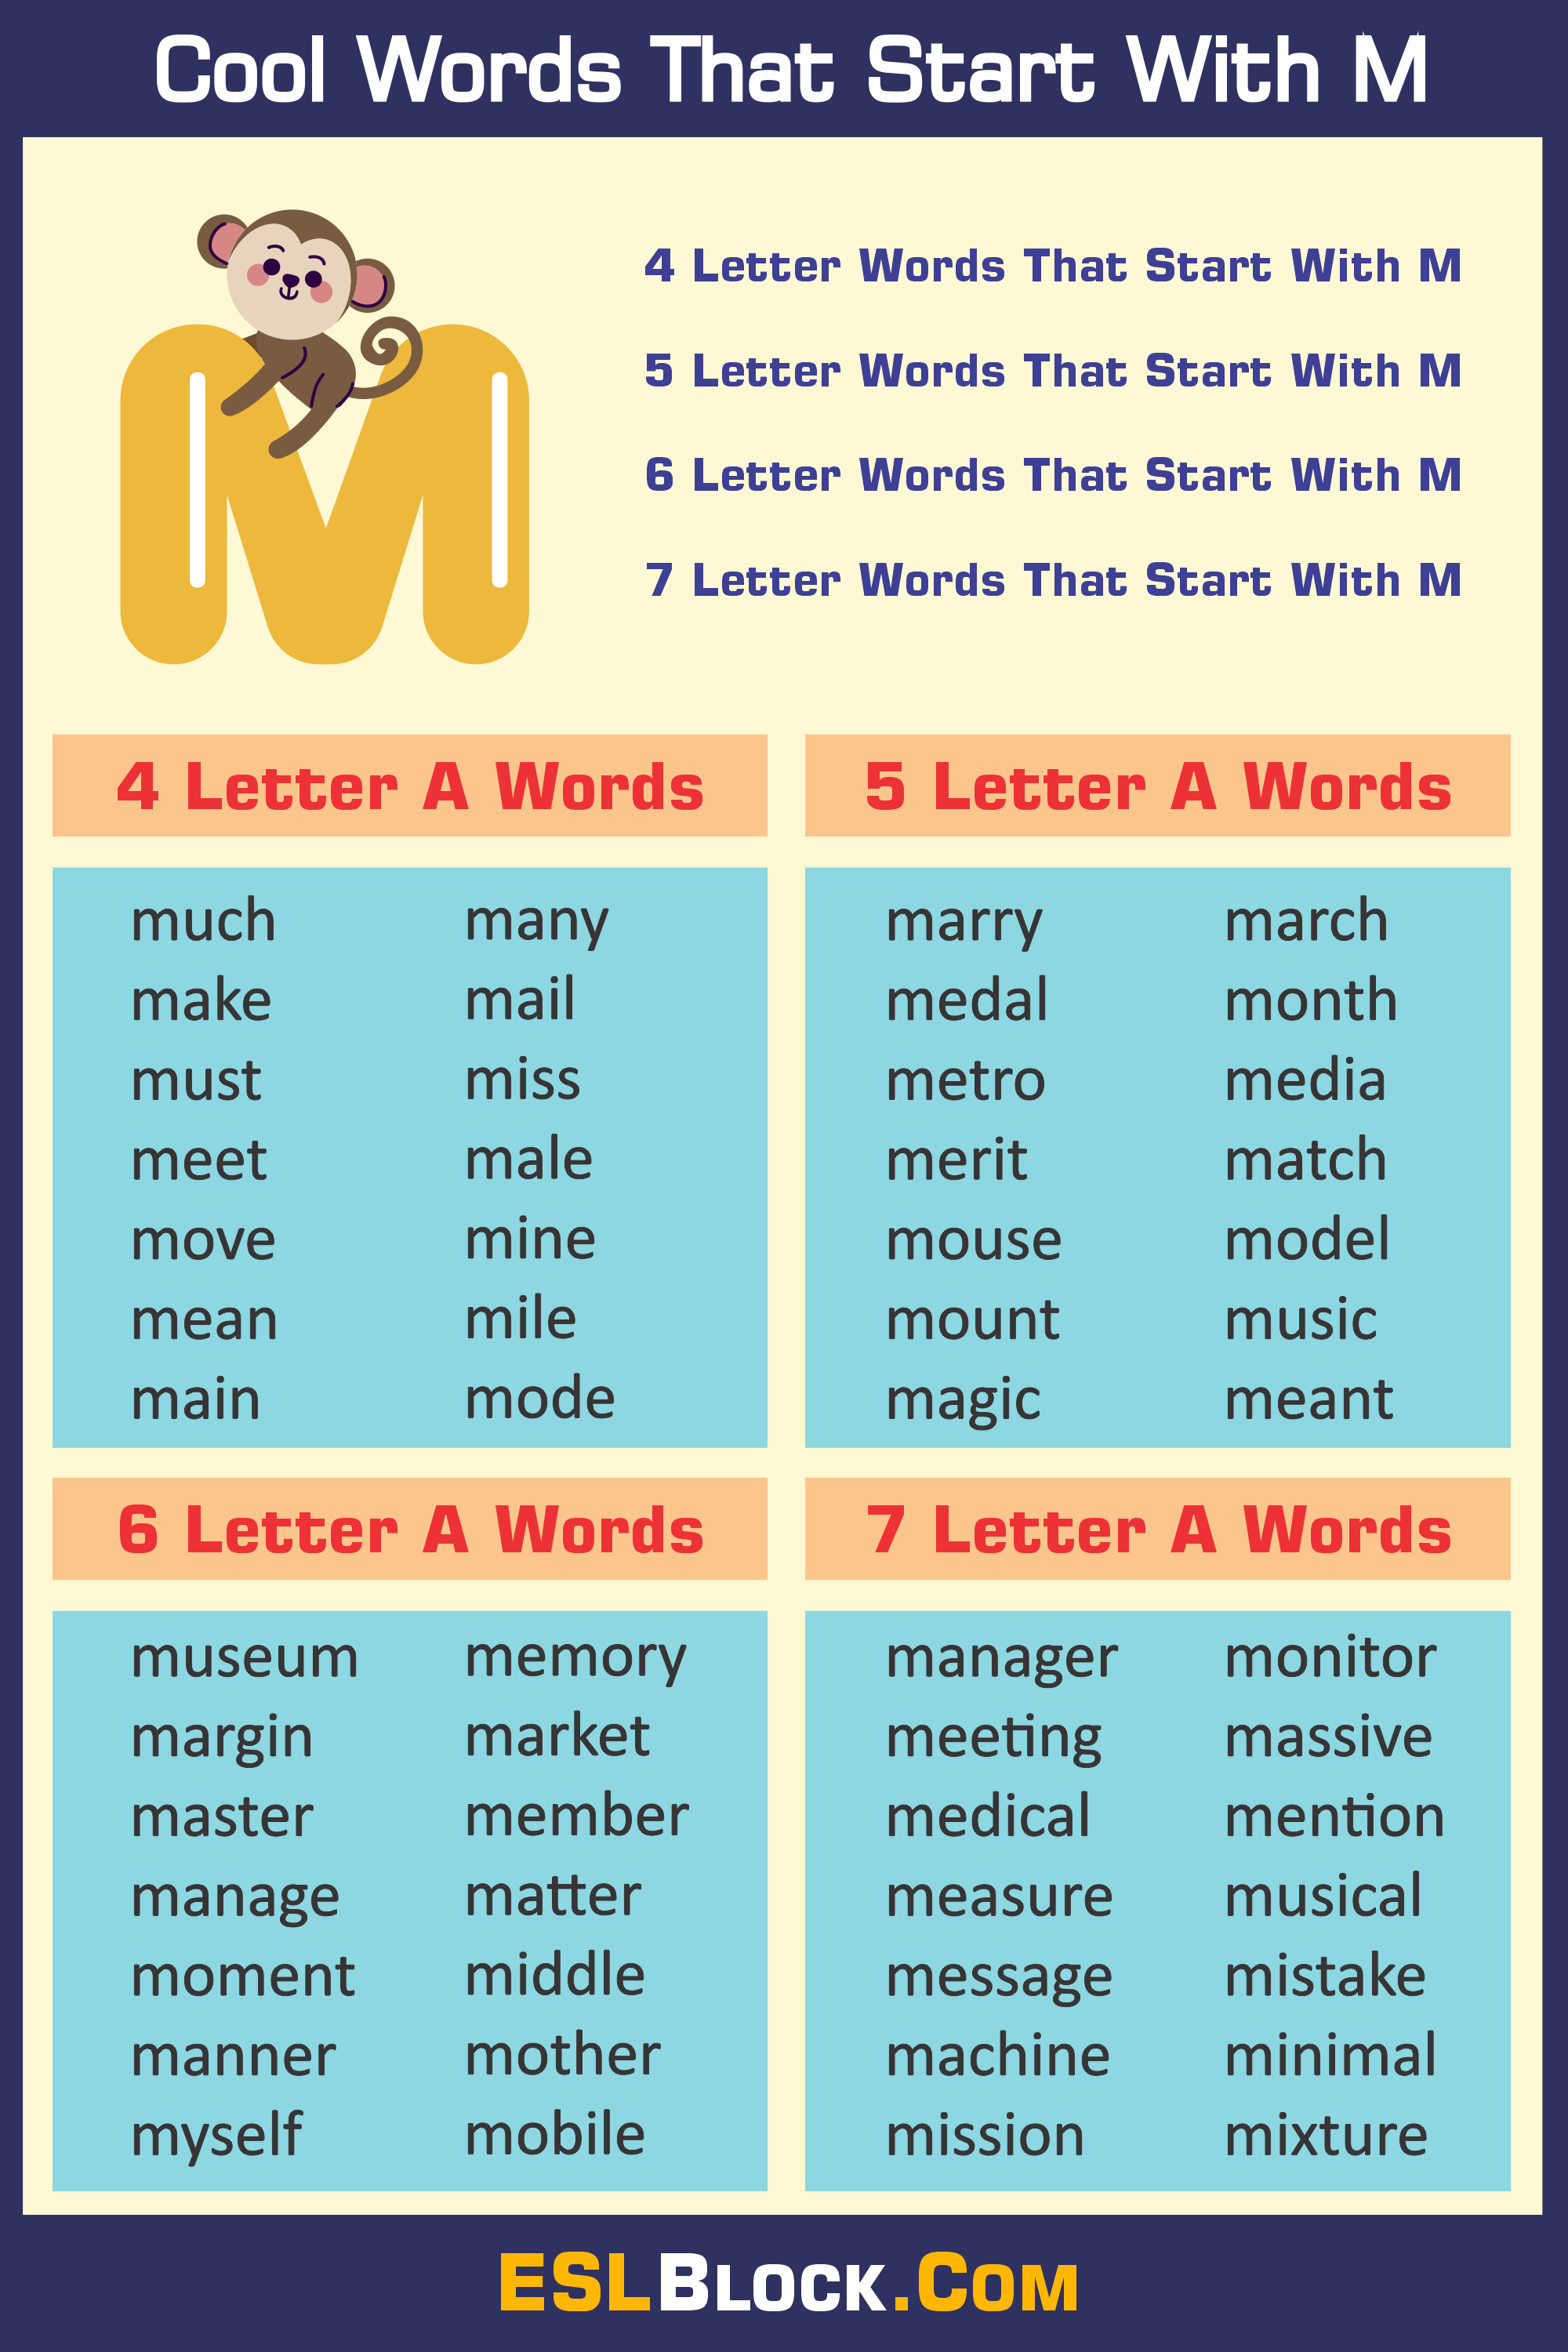 4 Letter Words, 4 Letter Words That Start With M, 5 Letter Words, 5 Letter Words That Start With M, 6 Letter Words, 6 Letter Words That Start With M, 7 Letter Words, 7 Letter Words That Start With M, Awesome Cool Words, Christmas Words That Start With M, Cool Words, Describing Words That Start With M, Descriptive Words That Start With M, English Words, Five Letter Words Starting with M, Good Words That Start With M, M Words, Nice Words That Start With M, Positive Words That Start With M, Unique Words, Word Dictionary, Words That Start With M, Words That Start With M to Describe Someone